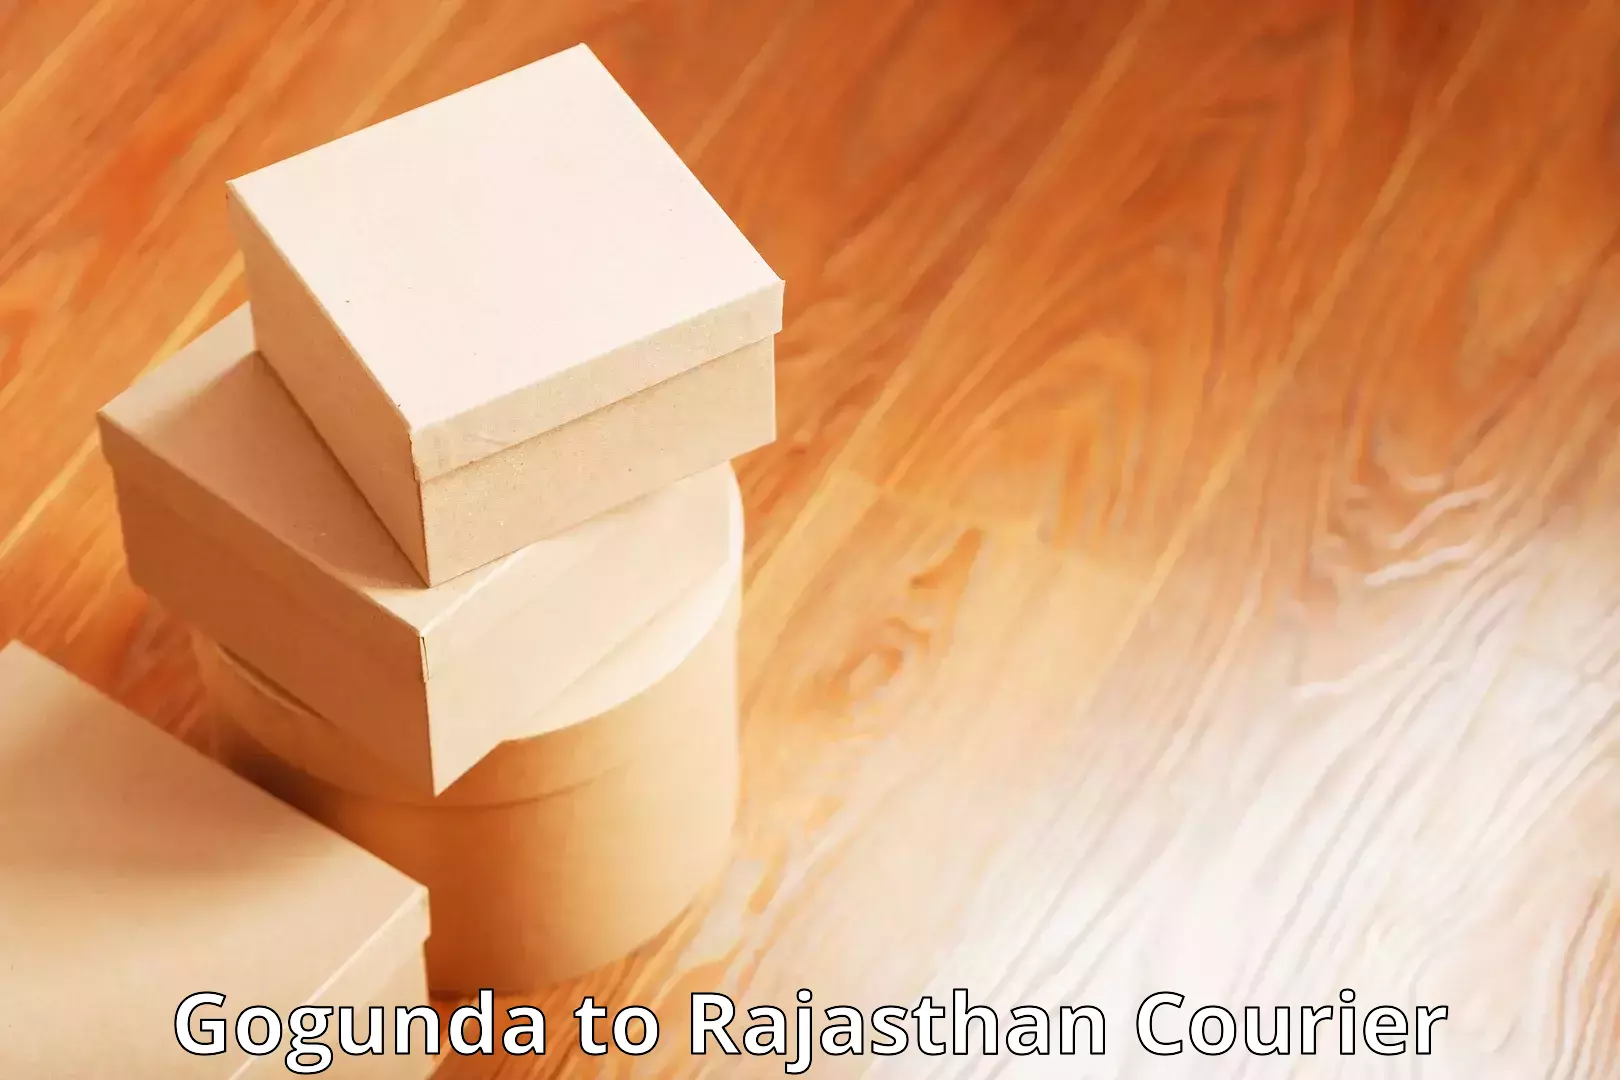 Automated parcel services Gogunda to Rajasthan